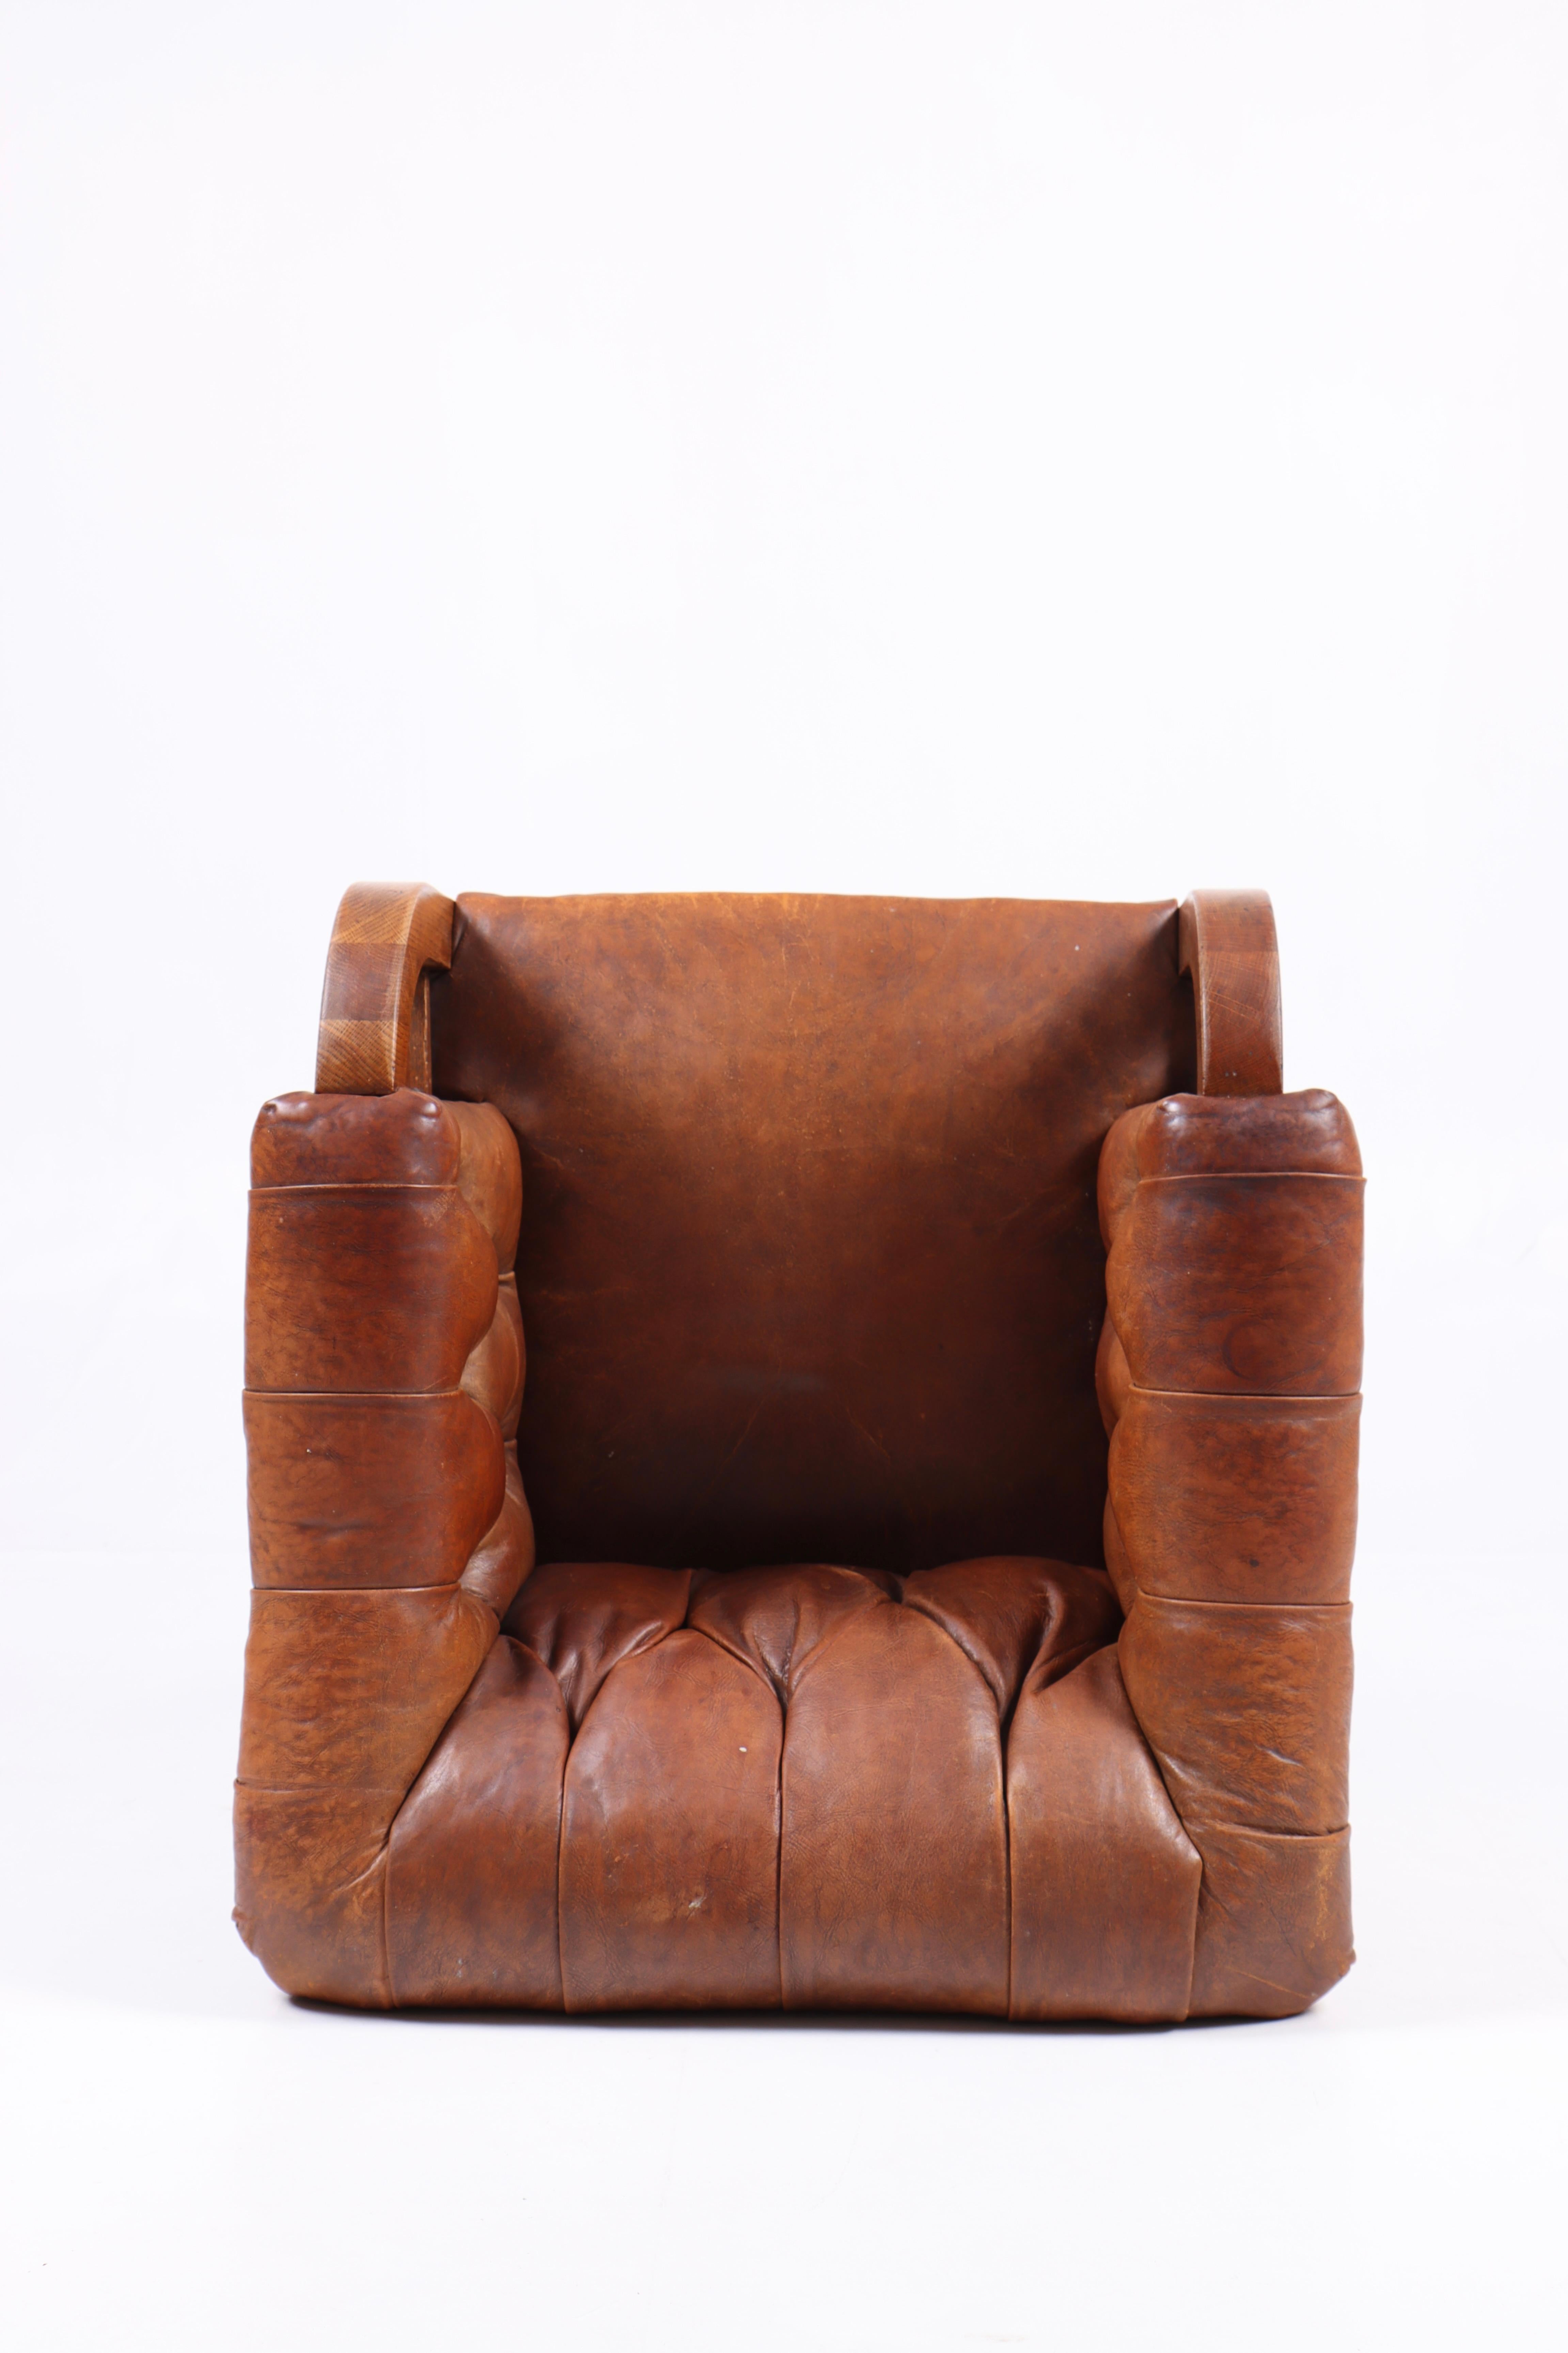 Lounge Chair in Patinated Leather, Made in Denmark, 1940s For Sale 4